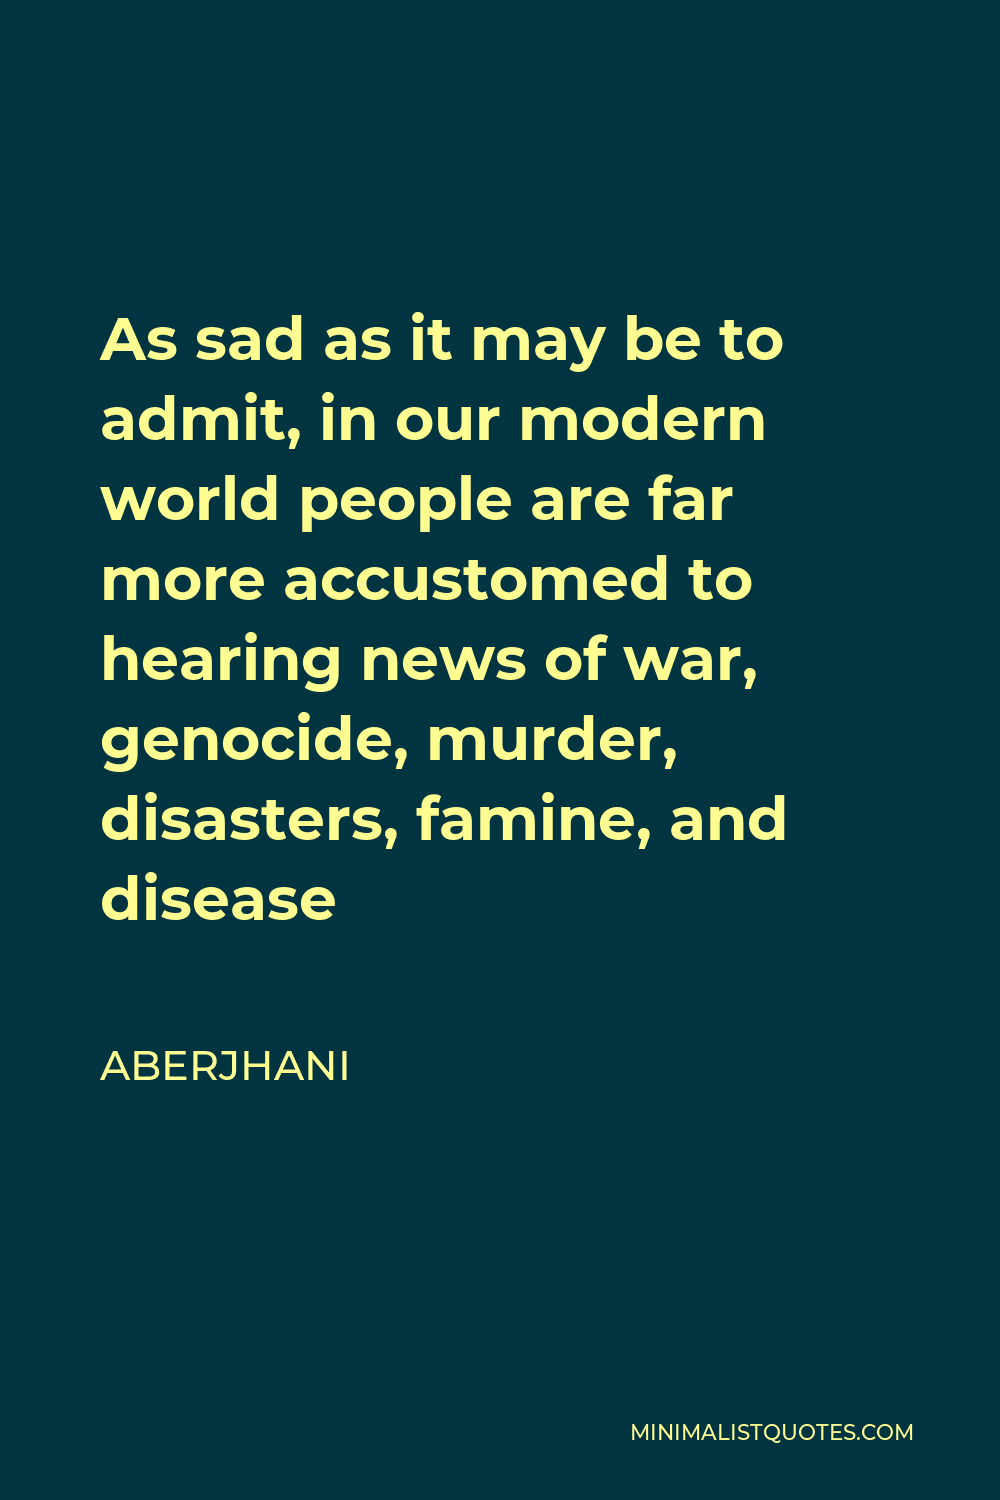 Aberjhani Quote - As sad as it may be to admit, in our modern world people are far more accustomed to hearing news of war, genocide, murder, disasters, famine, and disease